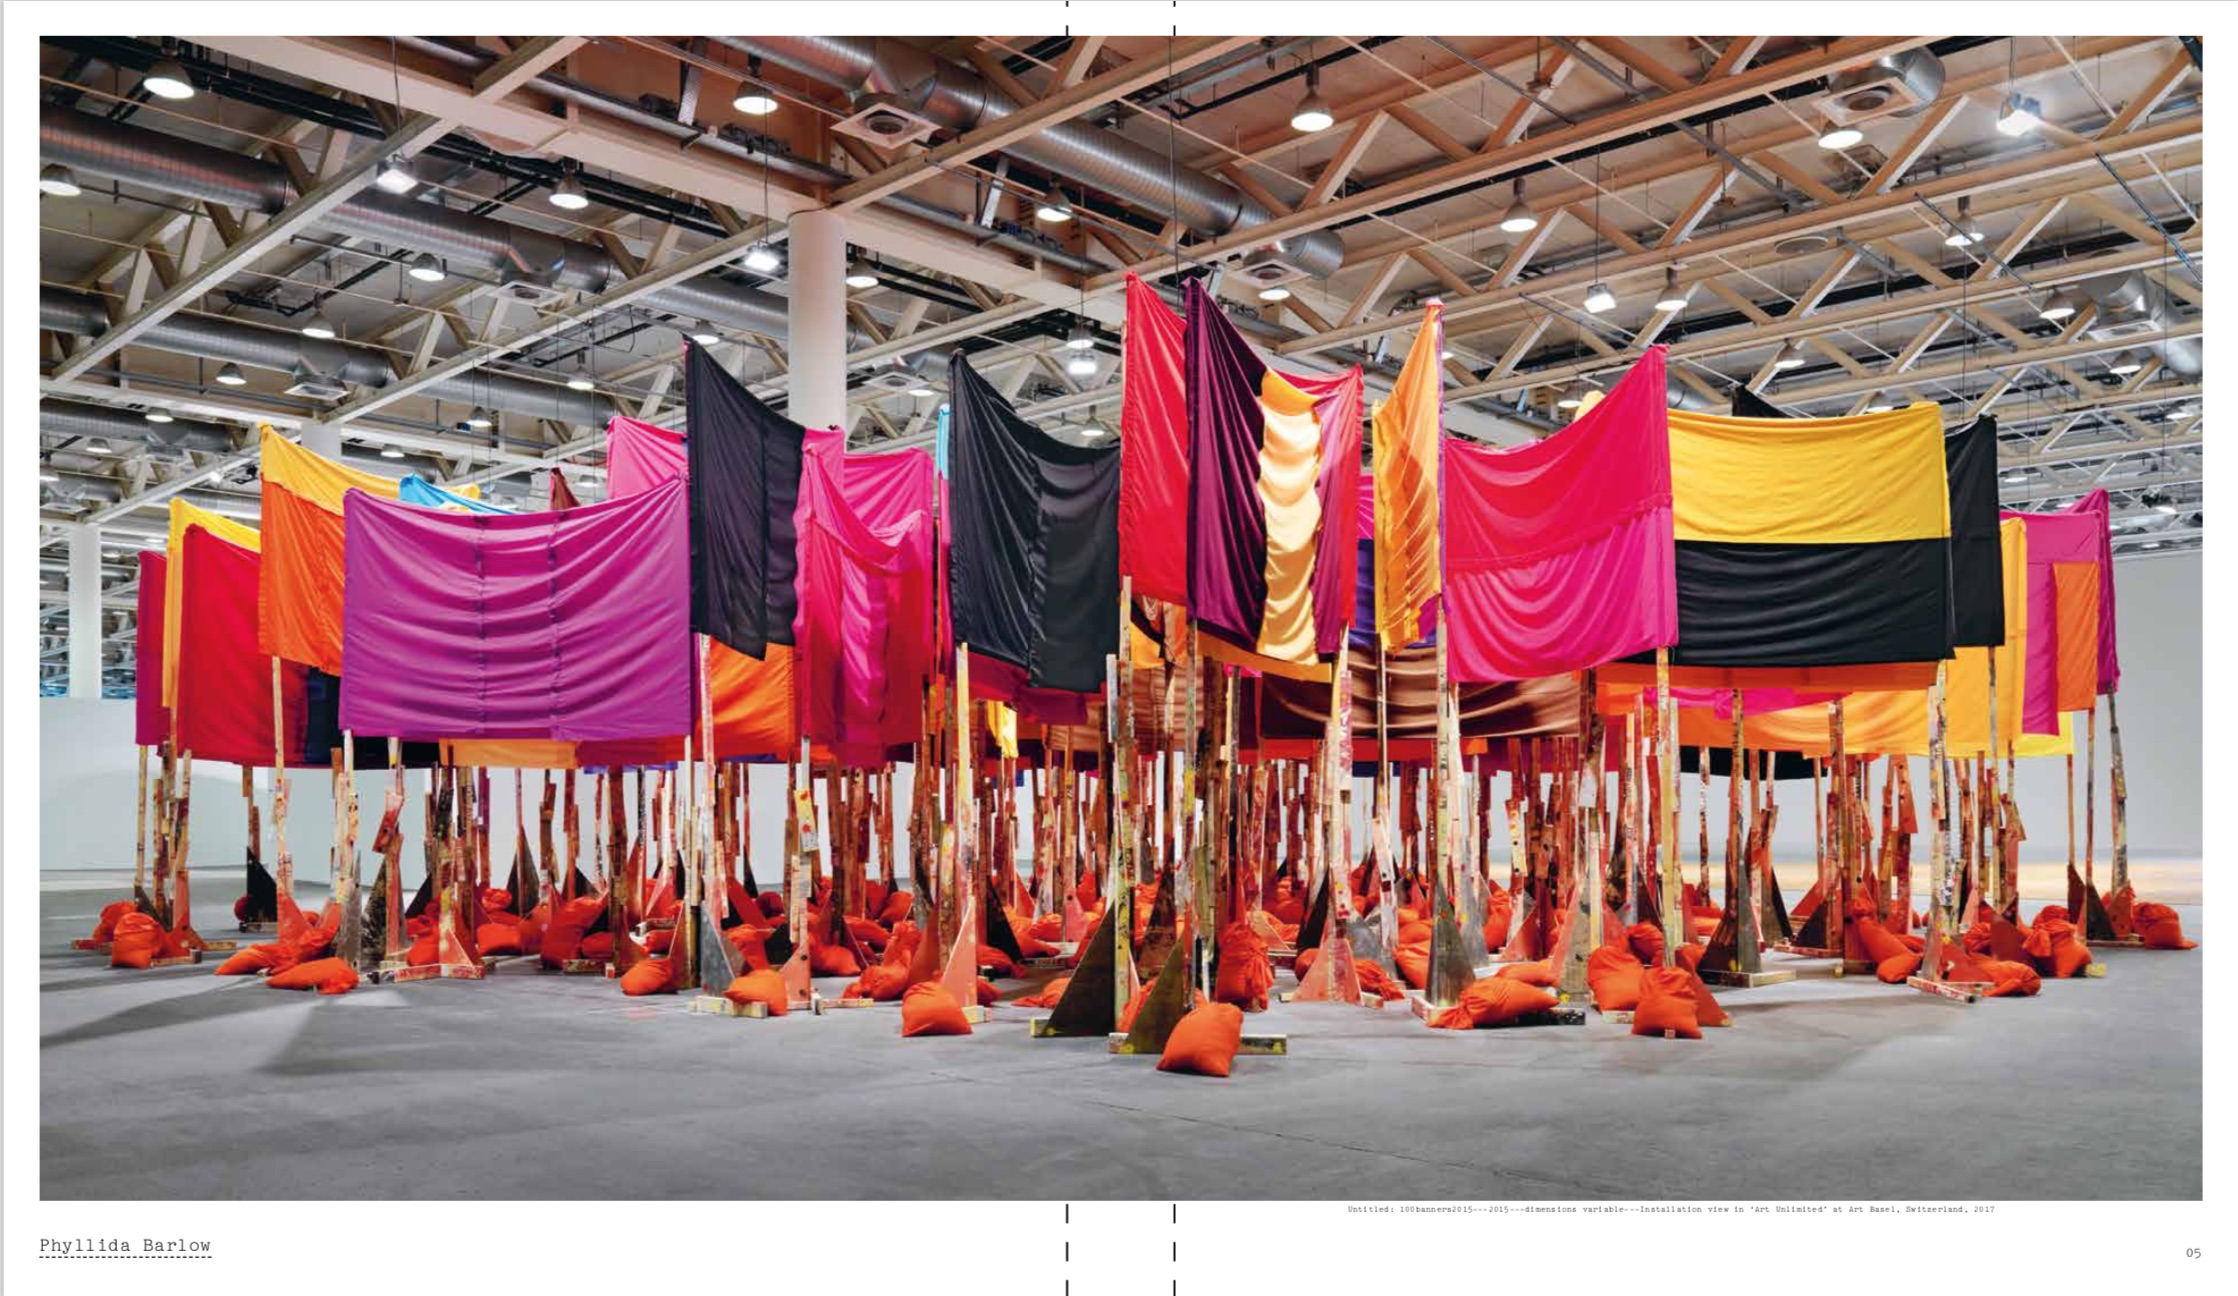 By PHAIDON EDITORS, Jenelle Porter from Vitamin T: Threads and Textiles in Contemporary Art copyright Phaidon 2019